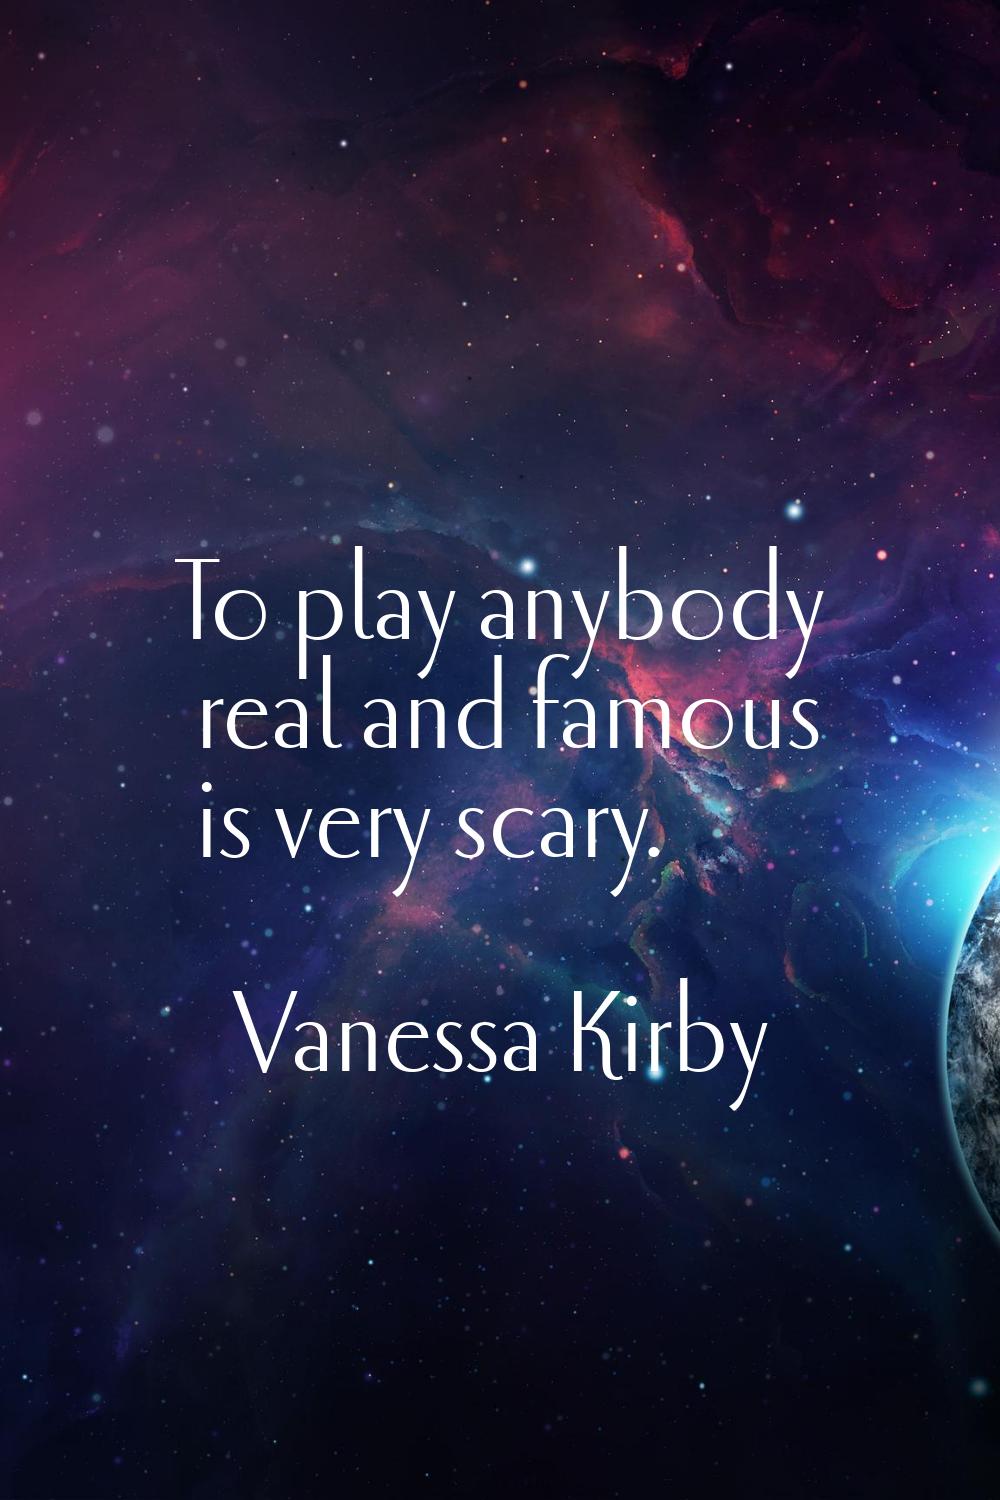 To play anybody real and famous is very scary.